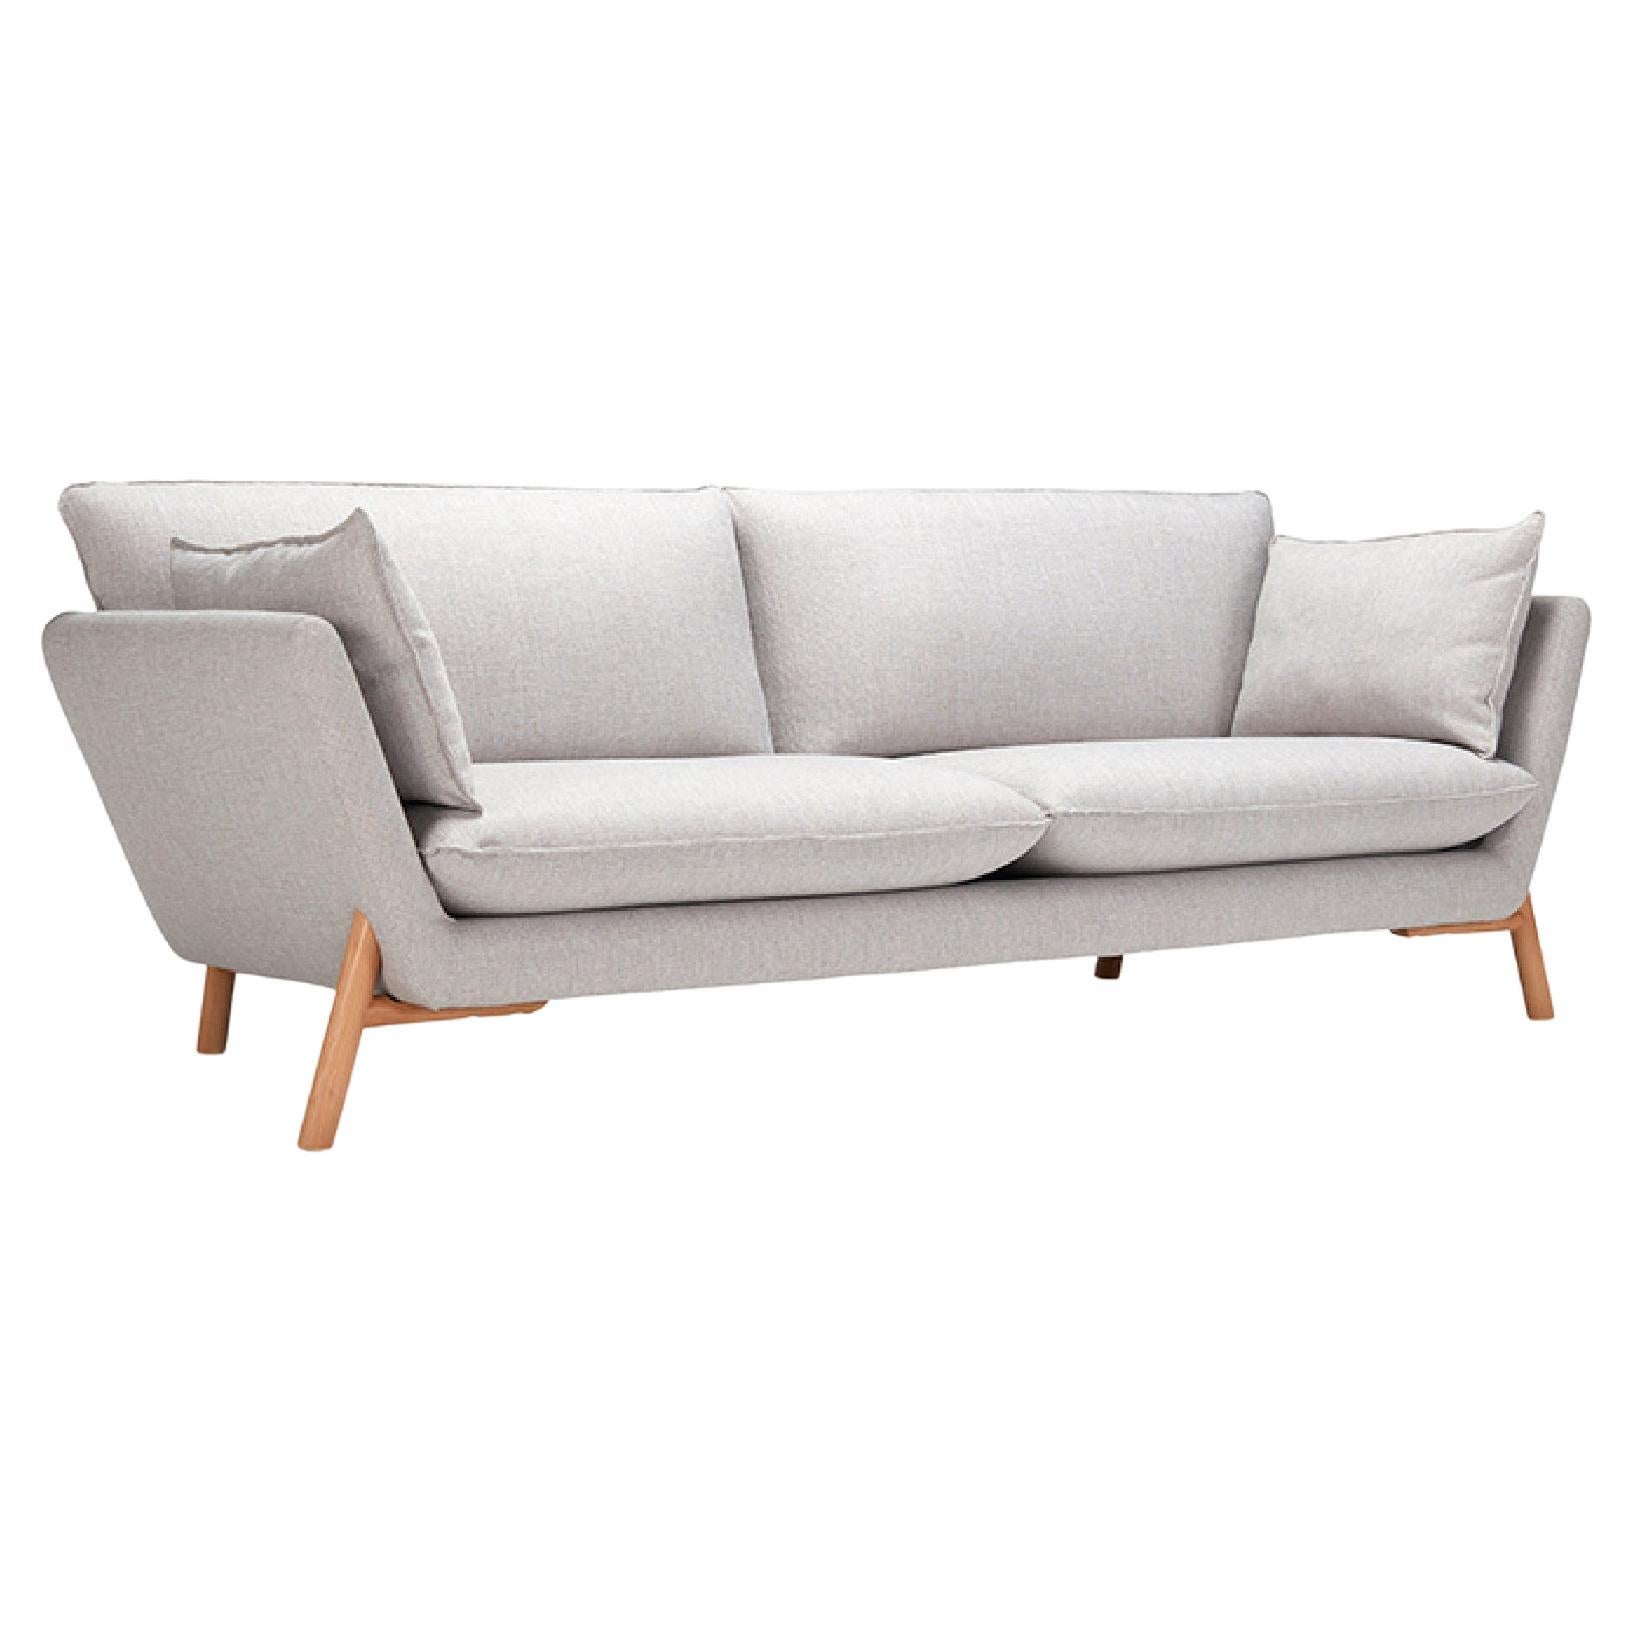 Hayche Nave 2 Seater Sofa - Grey, UK, Made to Order For Sale